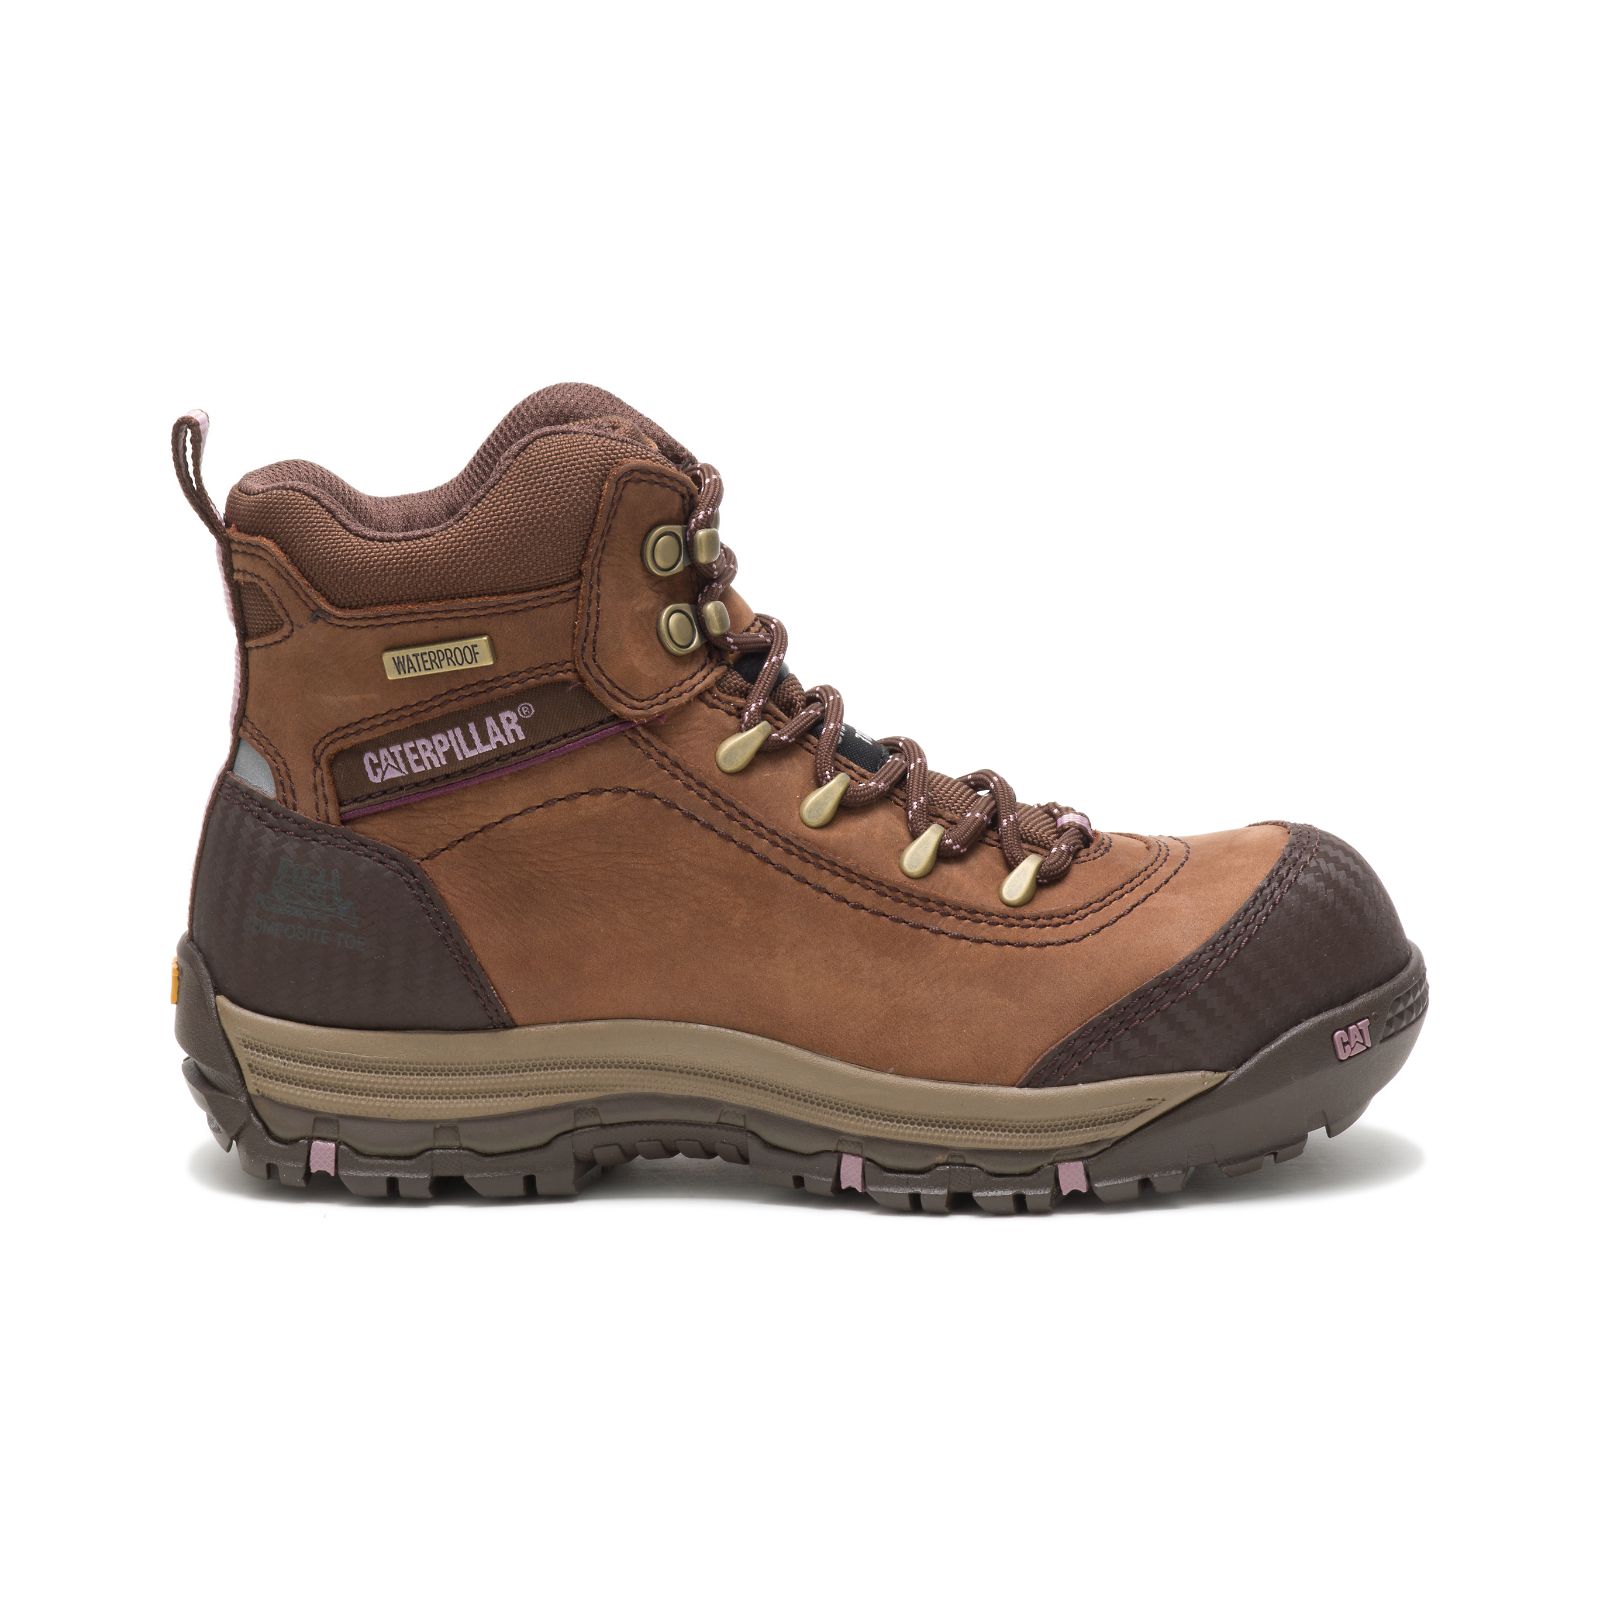 Caterpillar Boots Lahore - Caterpillar Ally Waterproof Composite Toe Womens Work Boots Brown (487061-OYD)